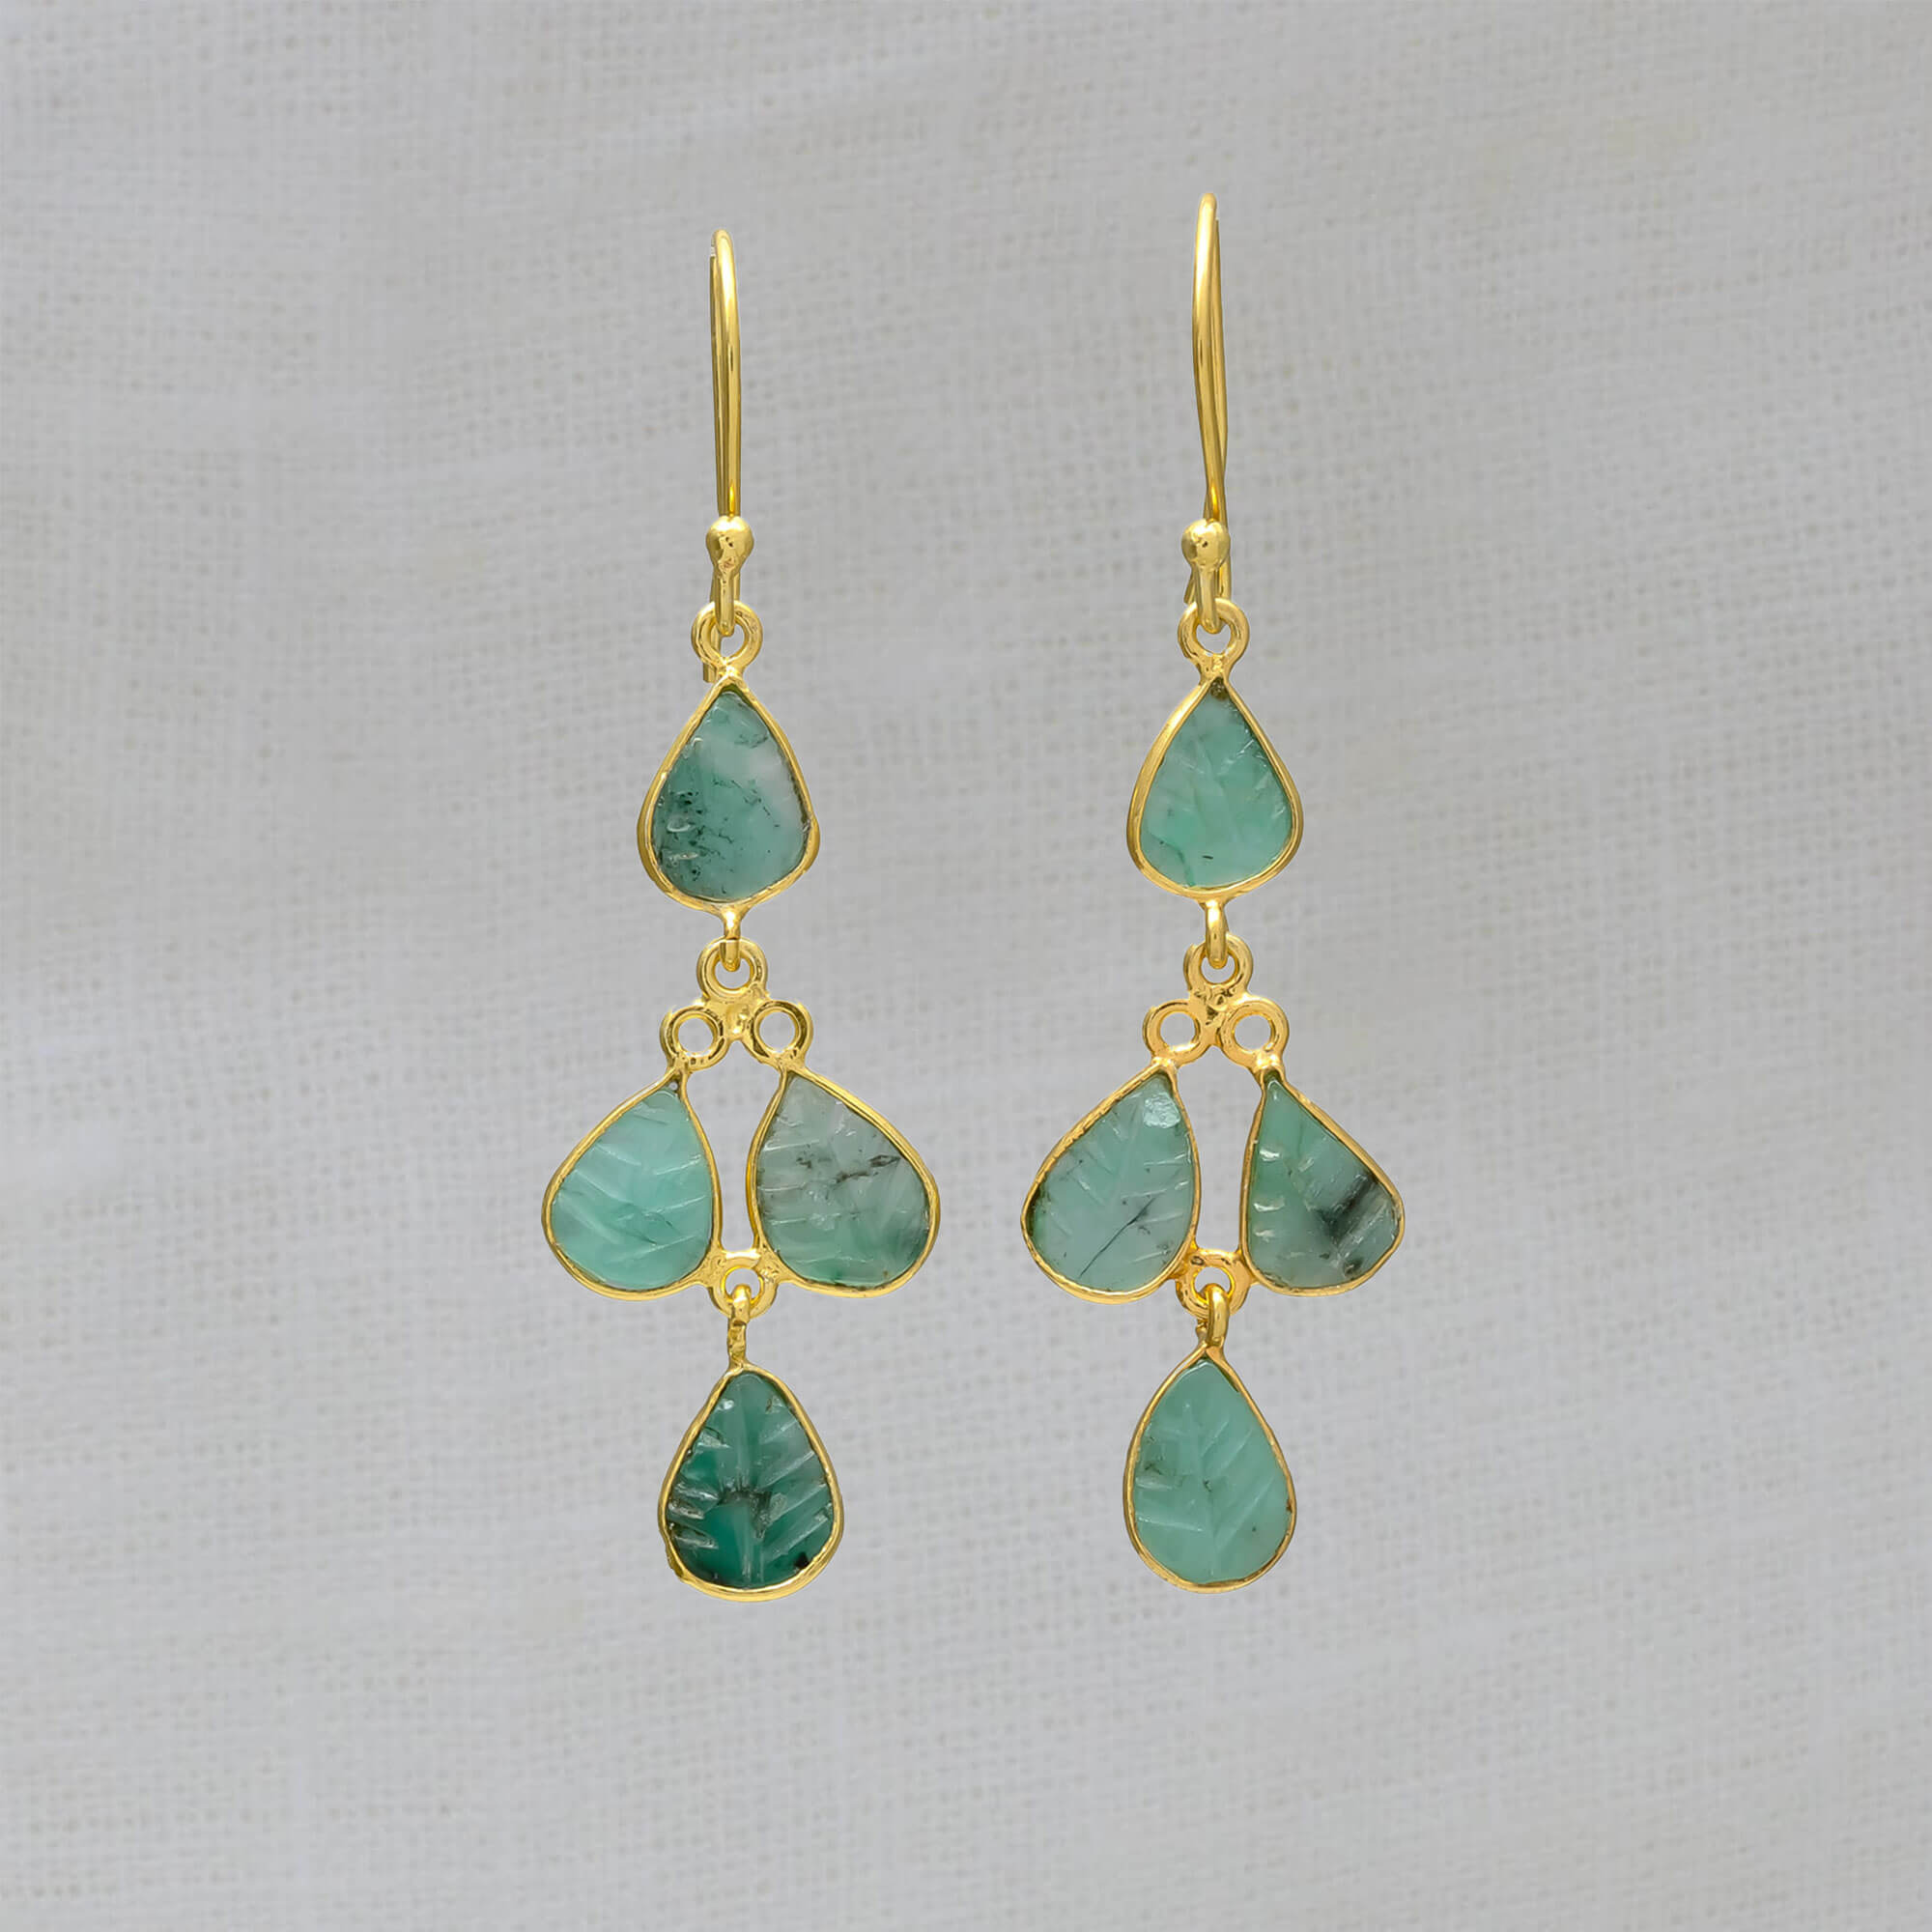  Drop earrings featuring 4 small leaf shaped carved emerald gemstones in a simple 18k gold vermeil setting, with a hook fitting